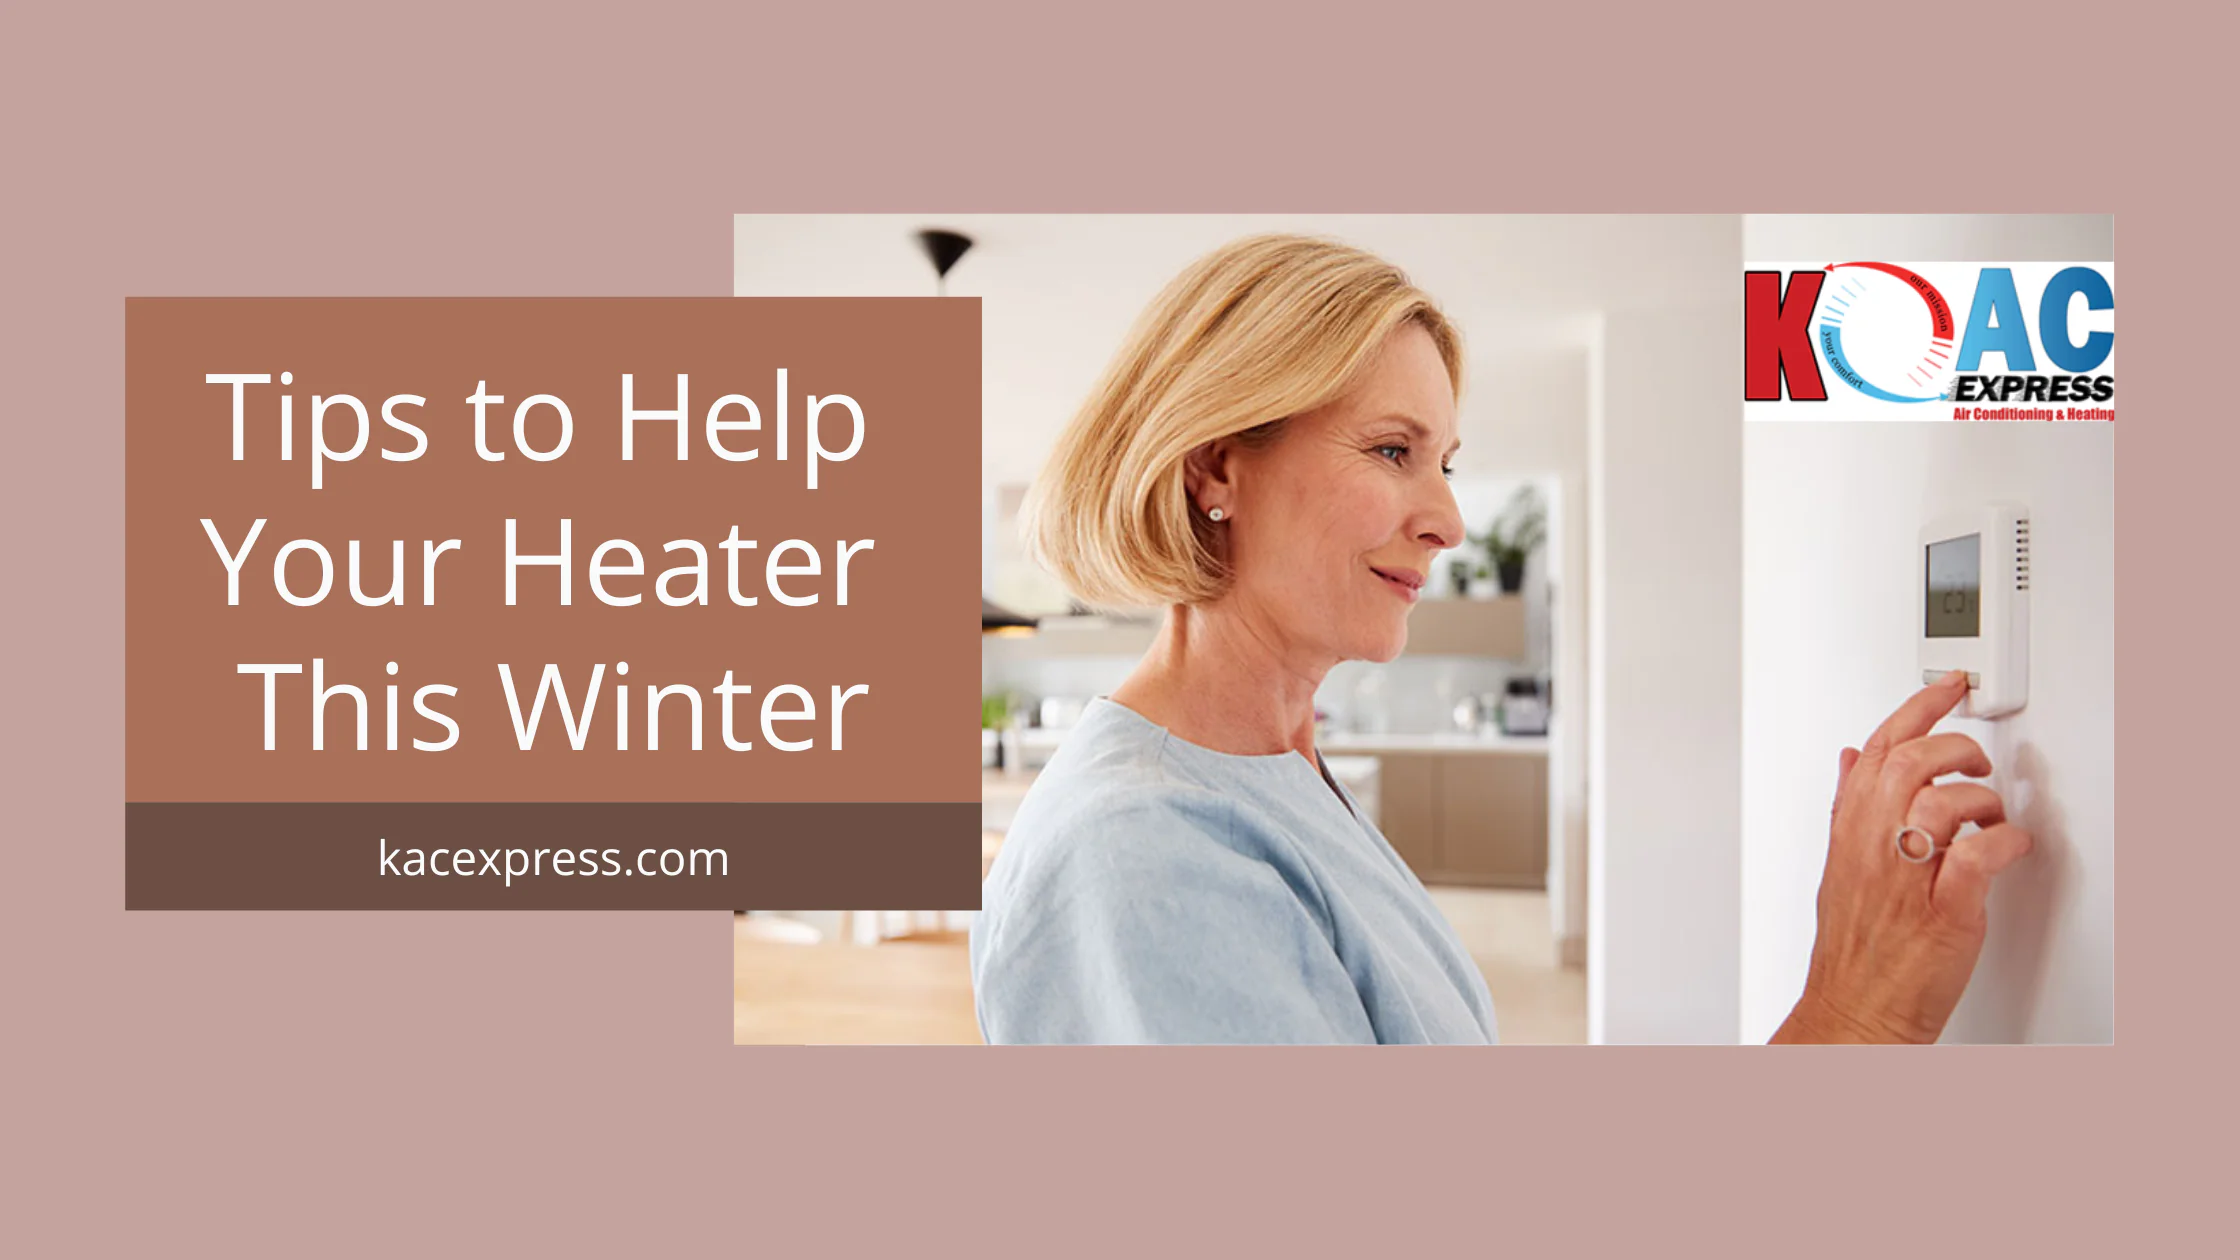 Tips to Help Your Heater This Winter